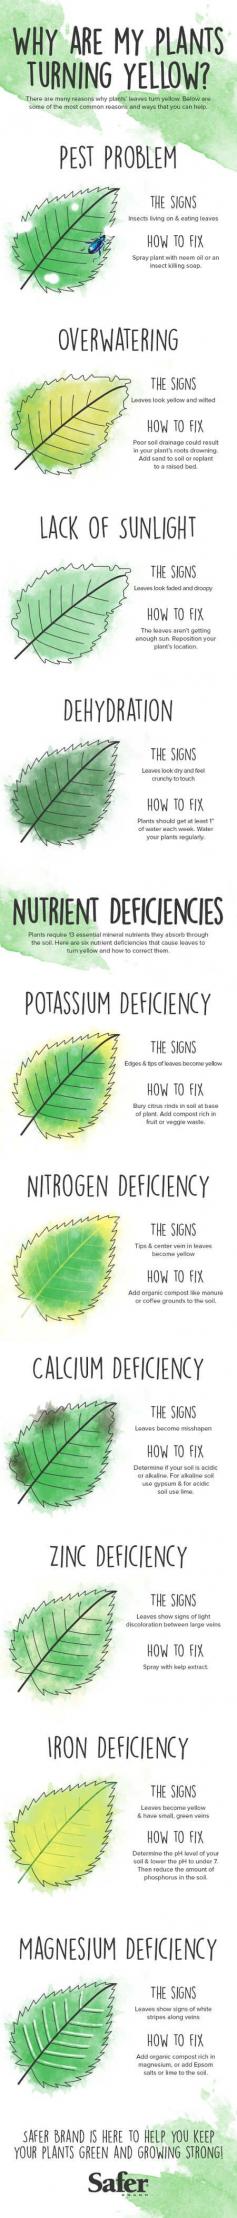 
                    
                        Why are my plants leaves turning yellow?  ow to identify and diagnose plant problems and sickness. This infographic chart also shows solutions so that you can solve your gardening problems.
                    
                